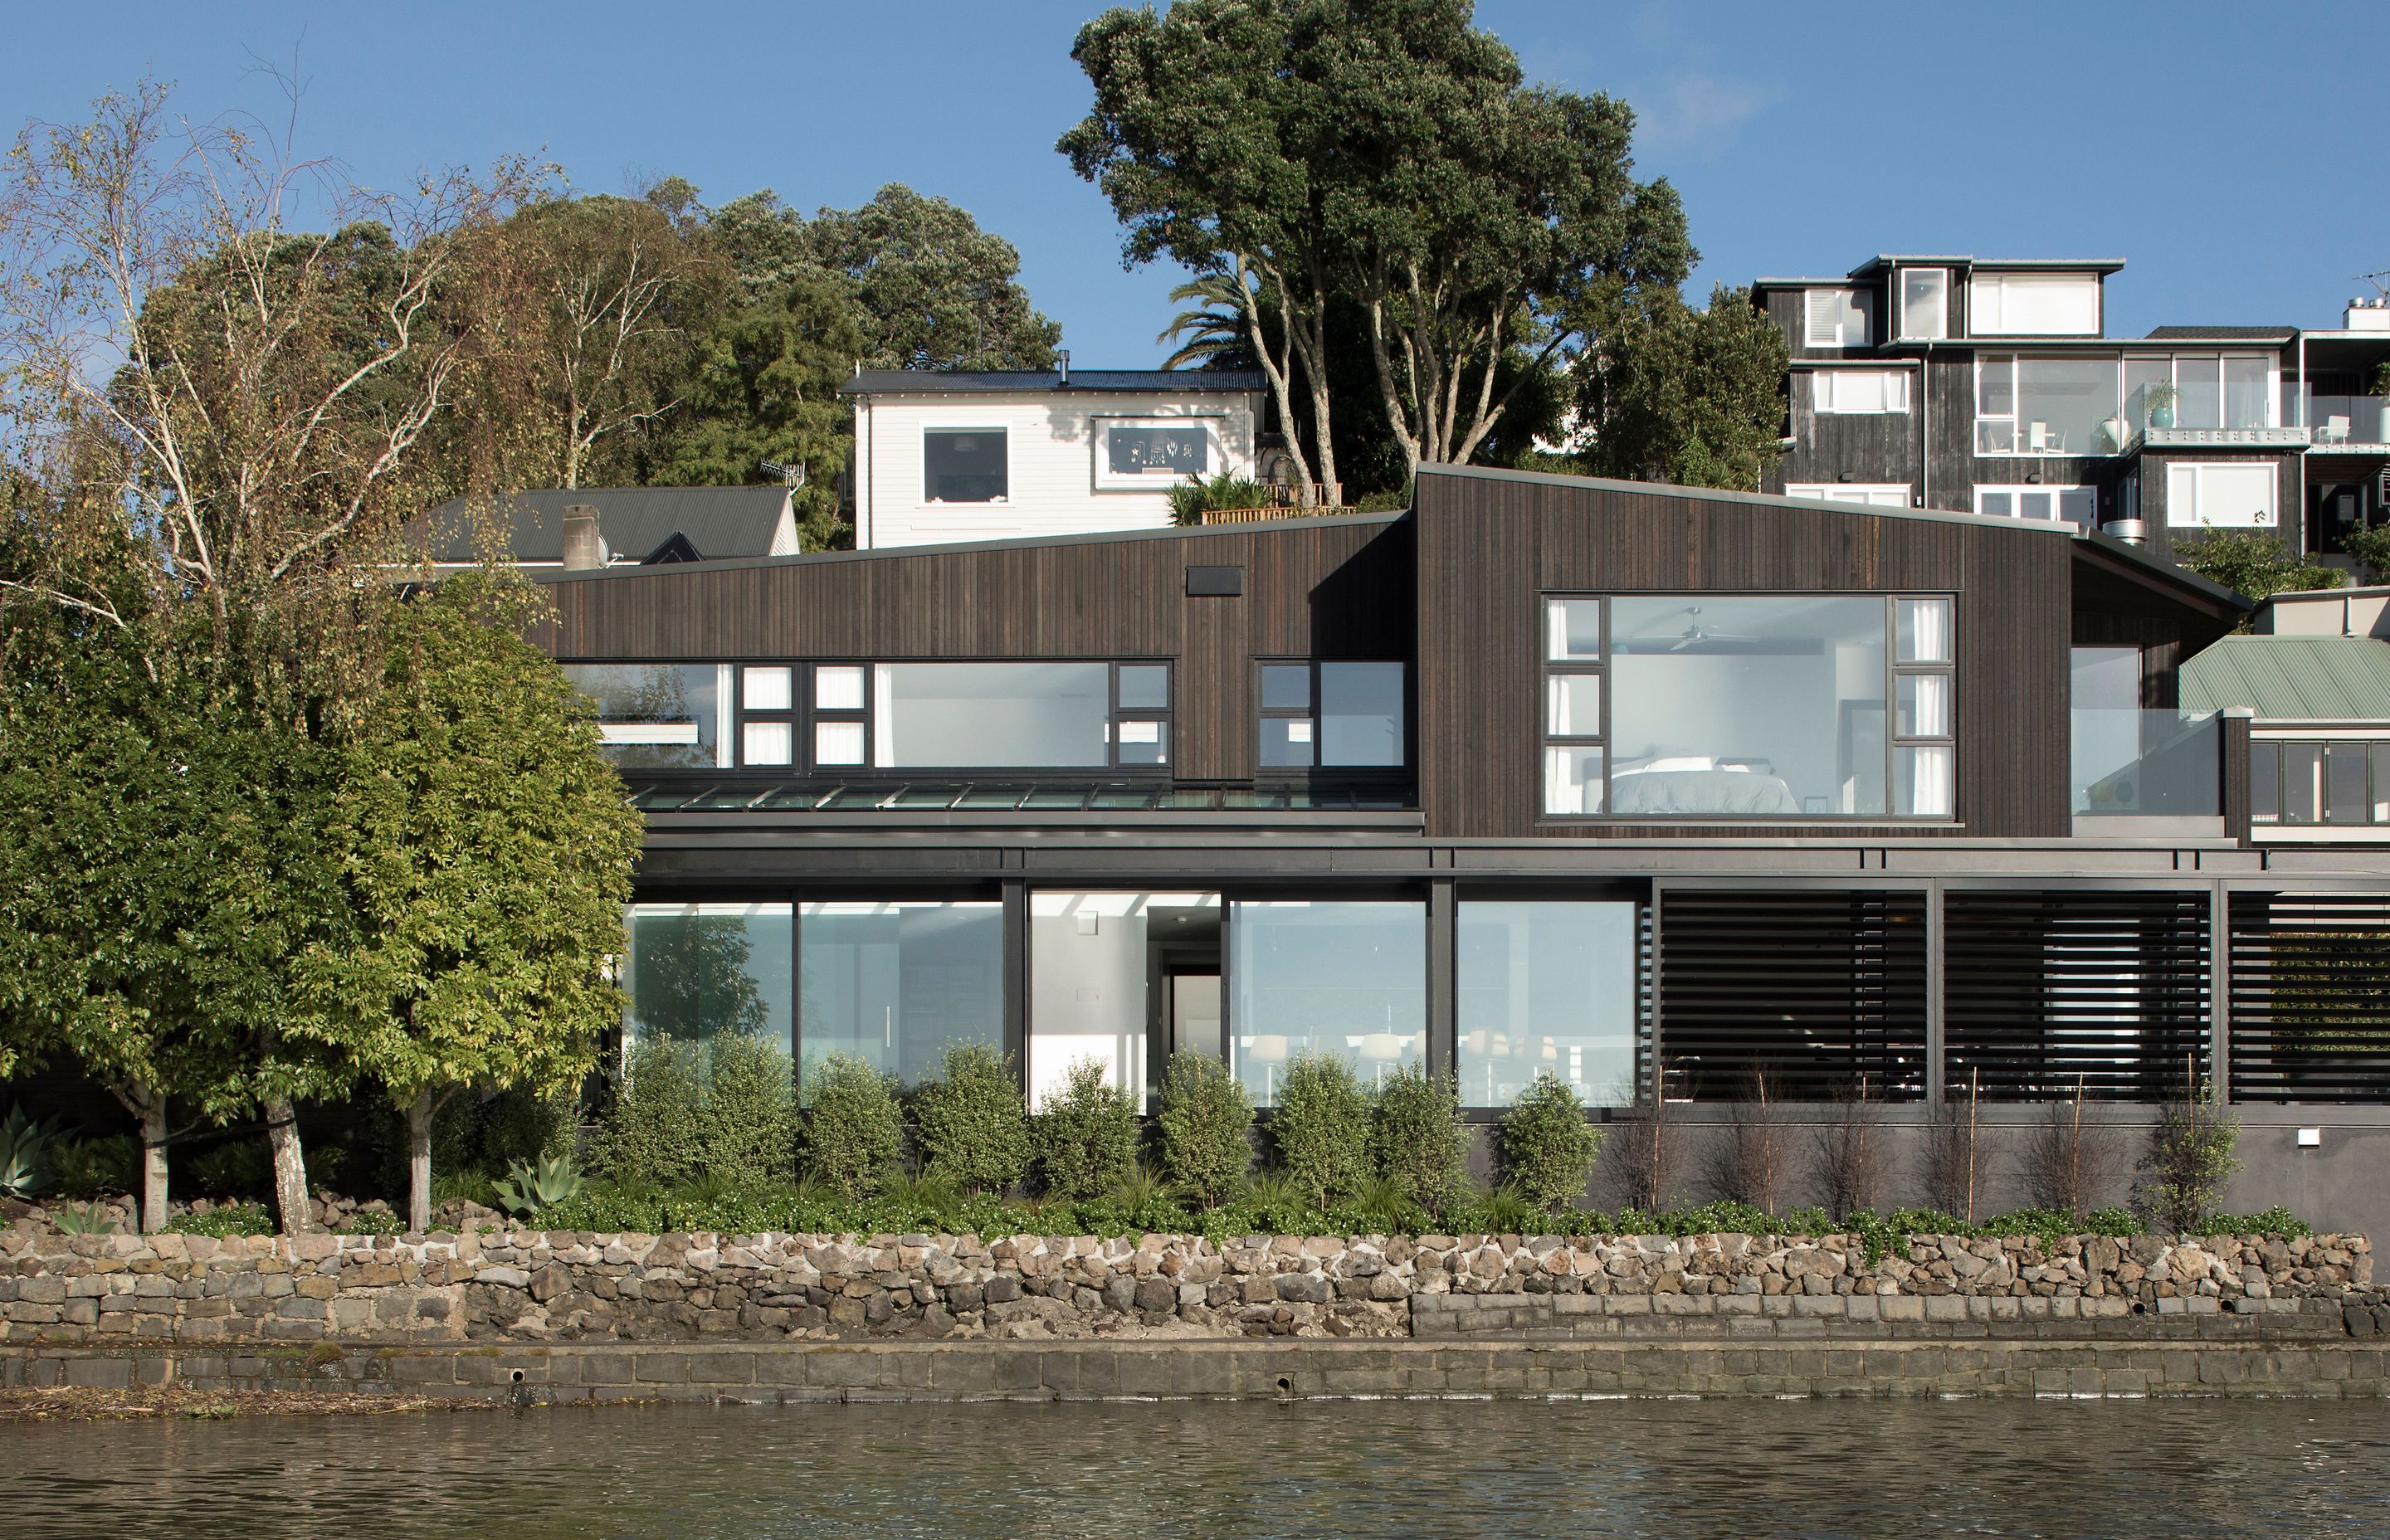 A view of The Tailored Home from the waters of Hobson Bay in Parnell.